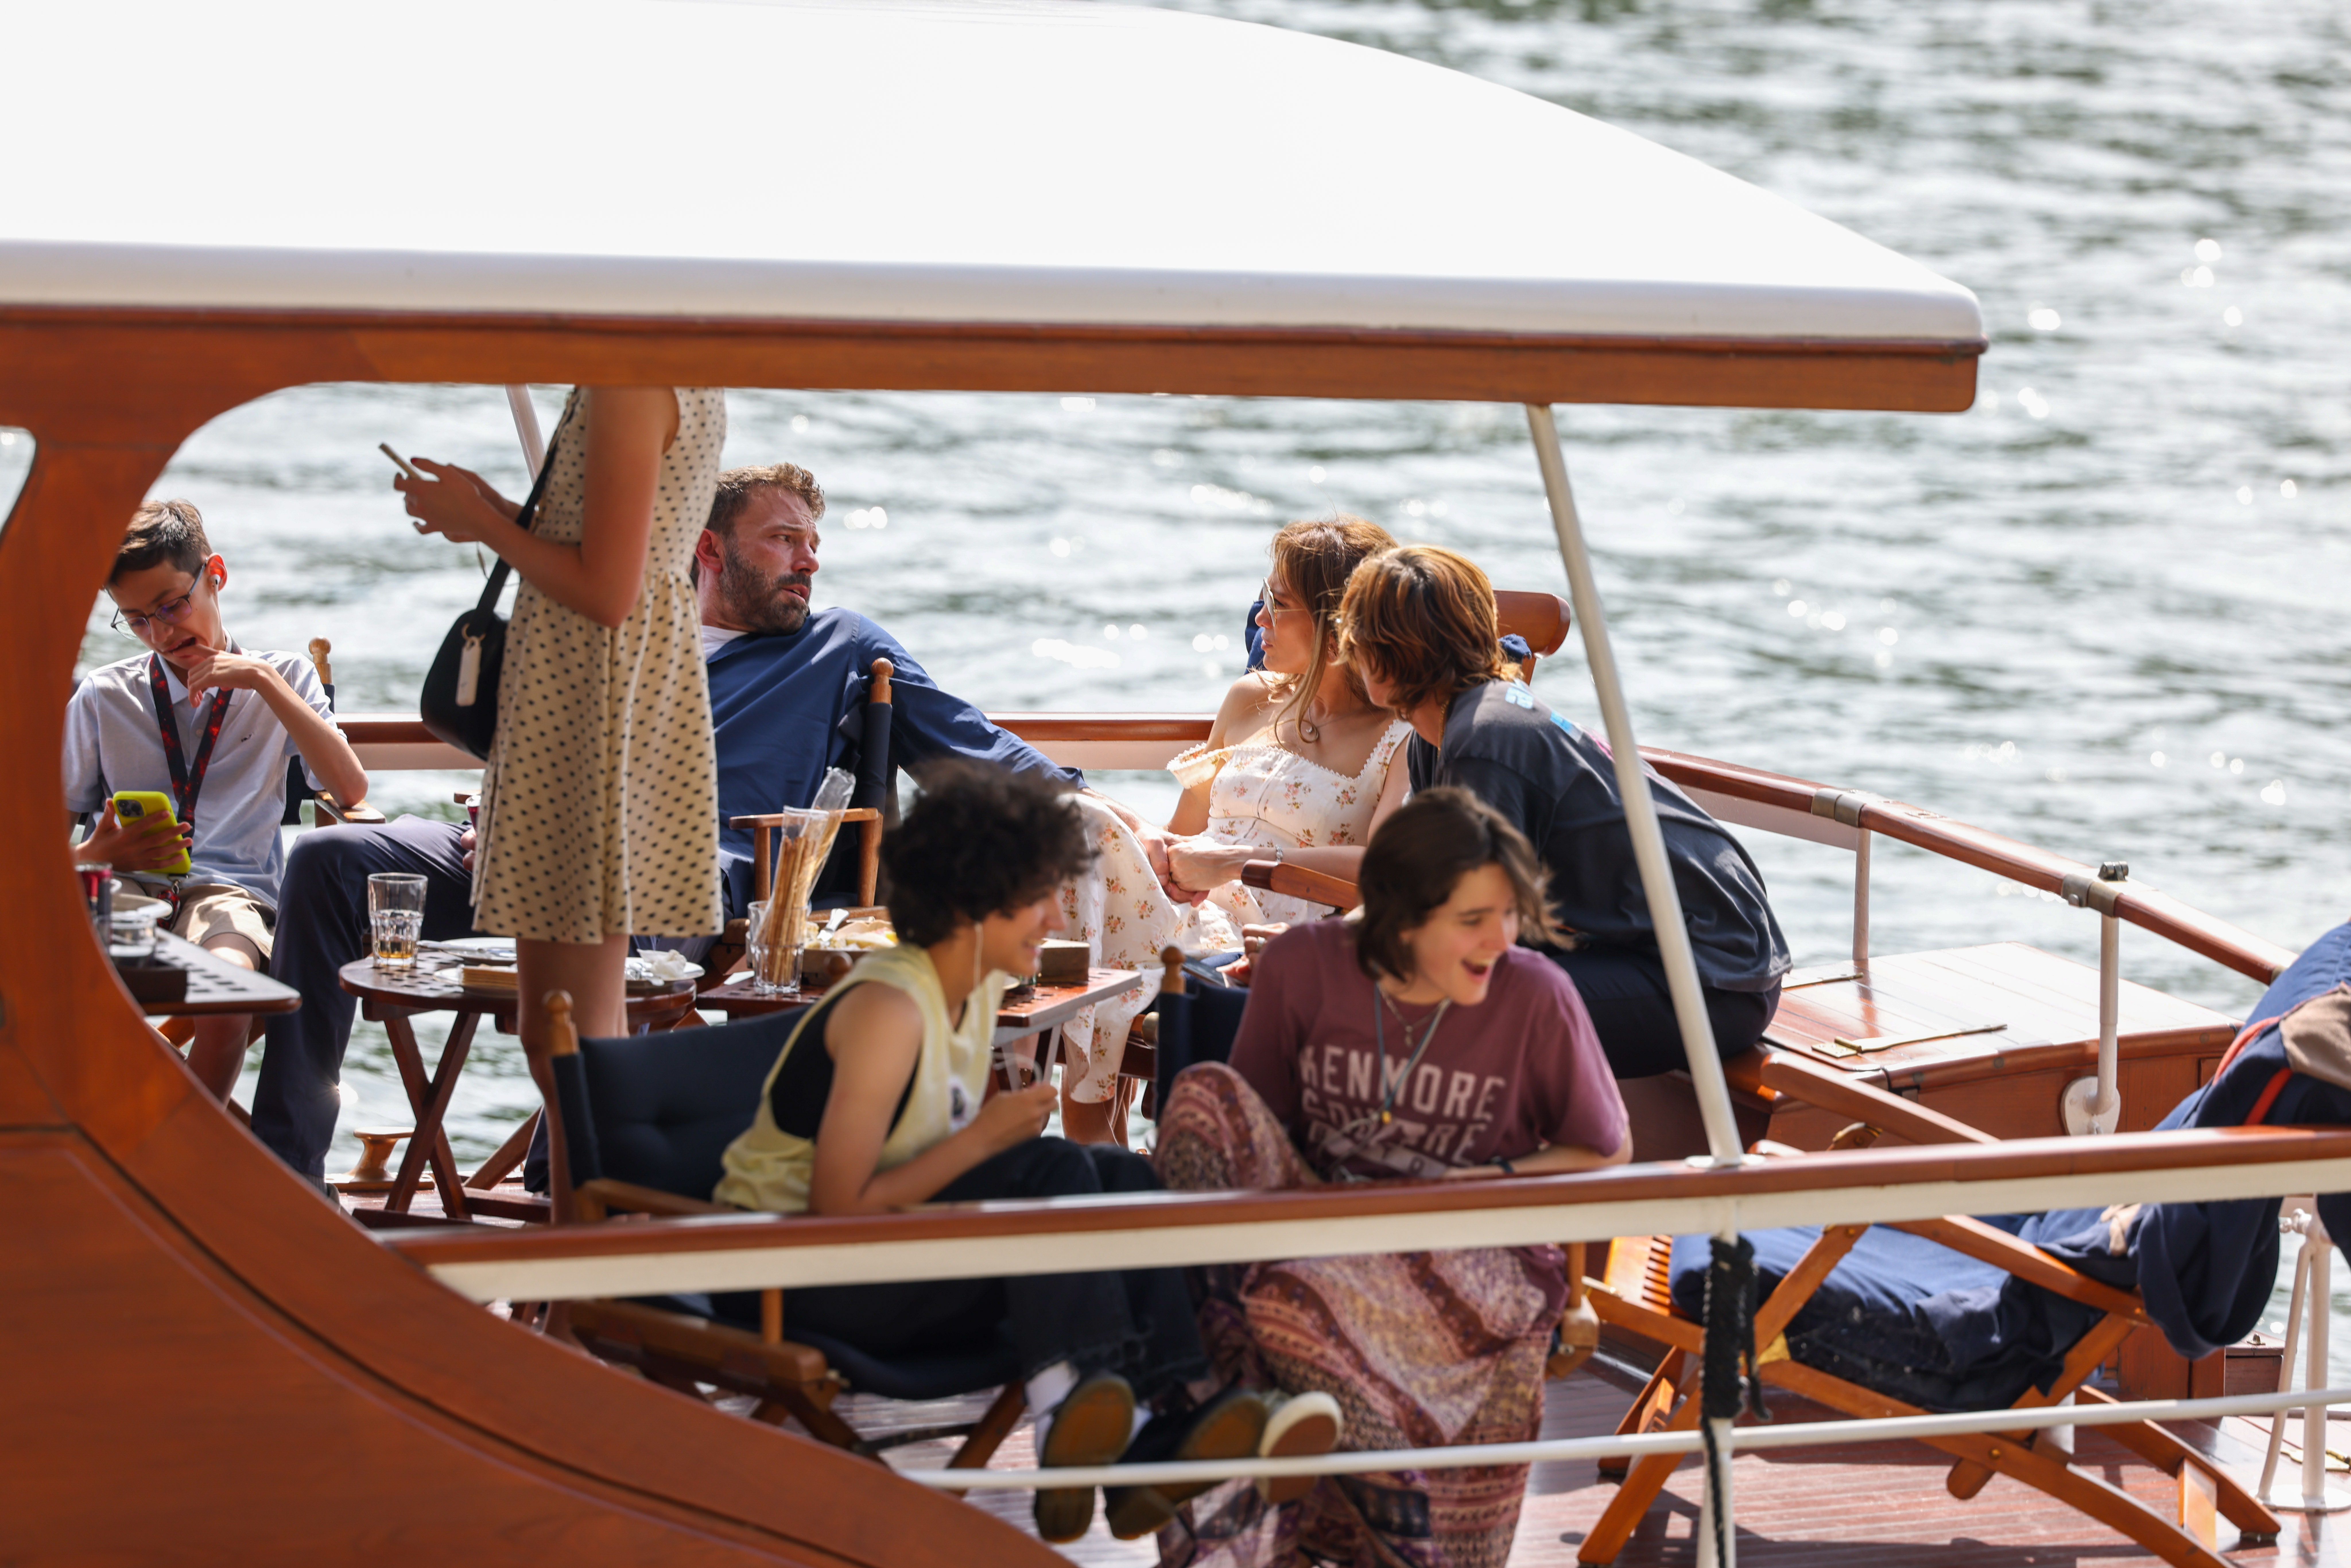 Jennifer Lopez and Ben Affleck enjoyed a cruise on the River Seine in Paris, France, on July 23, 2022, accompanied by some of their children, including Seraphina Affleck (front right) and Emme Muniz (front left). | Source: Getty Images